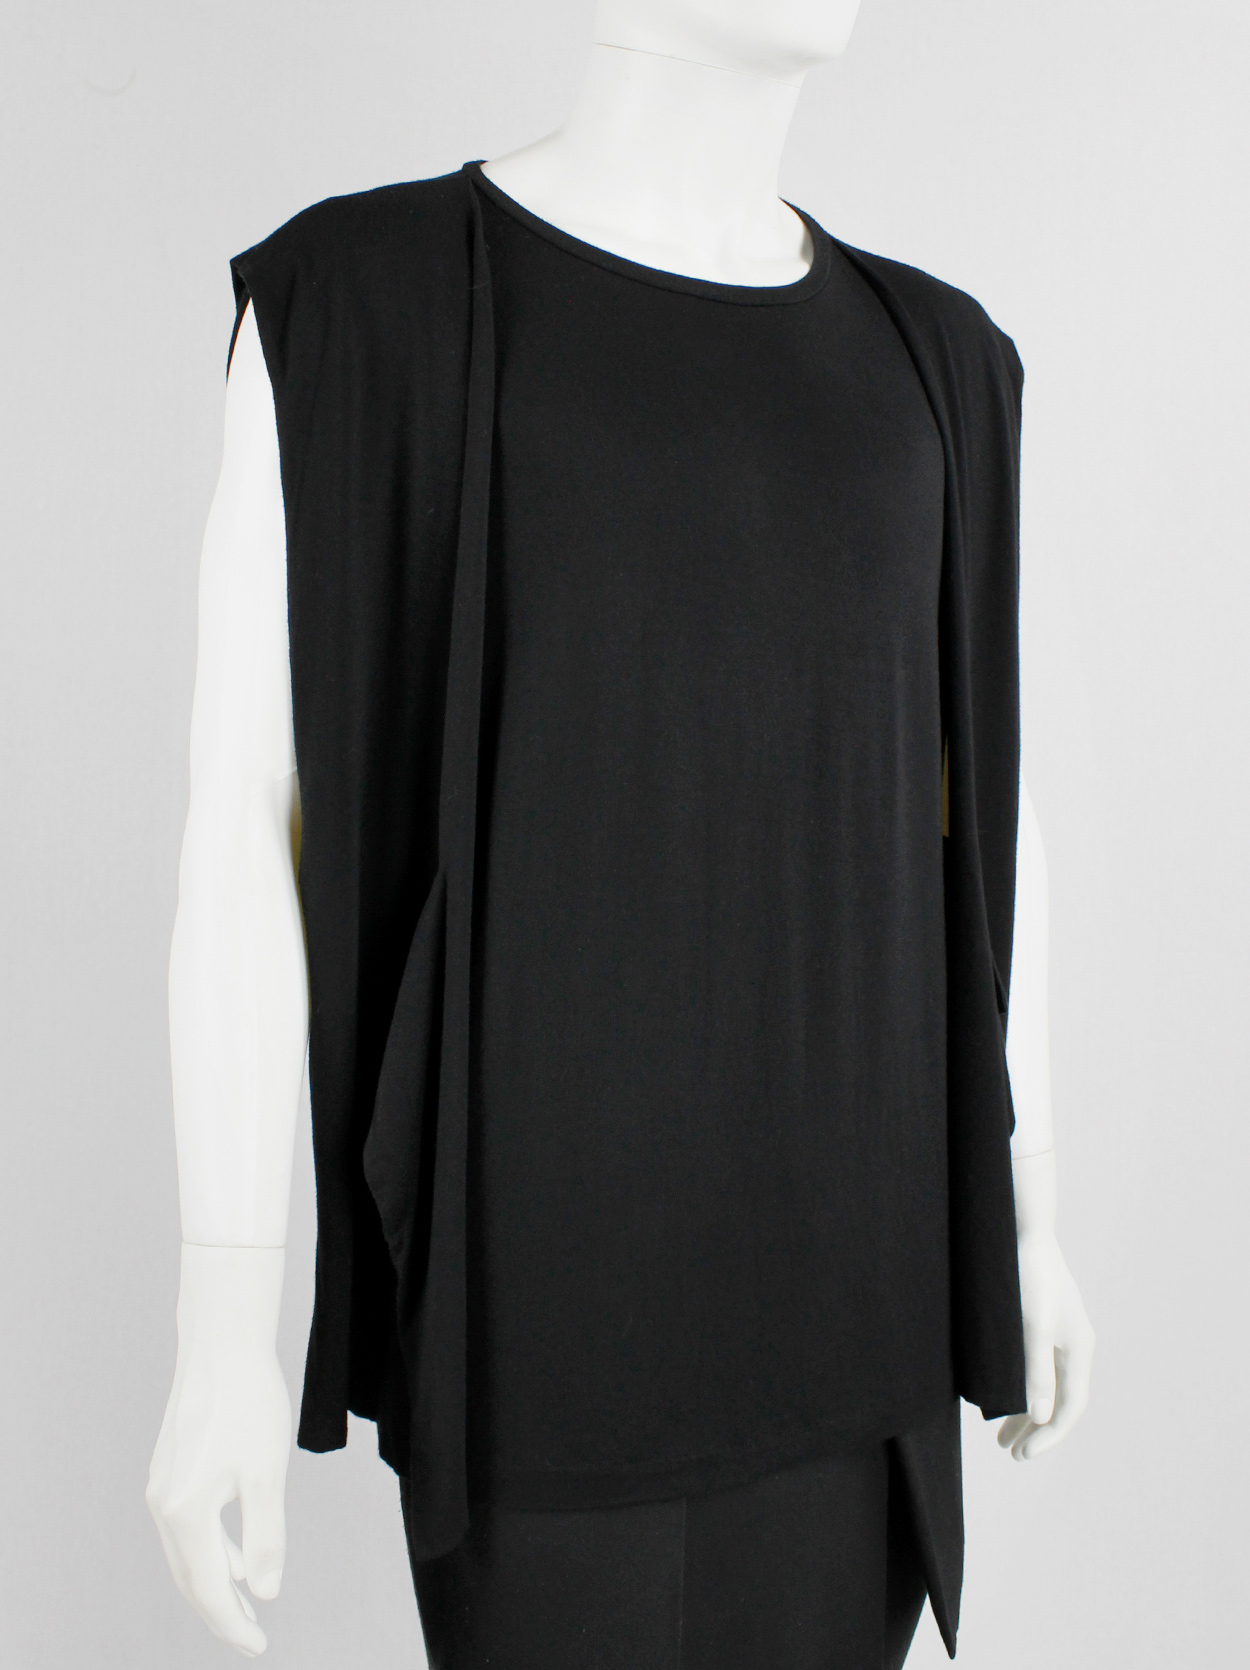 Rad by Rad Hourani black sleeveless top with attached geometric panels ...